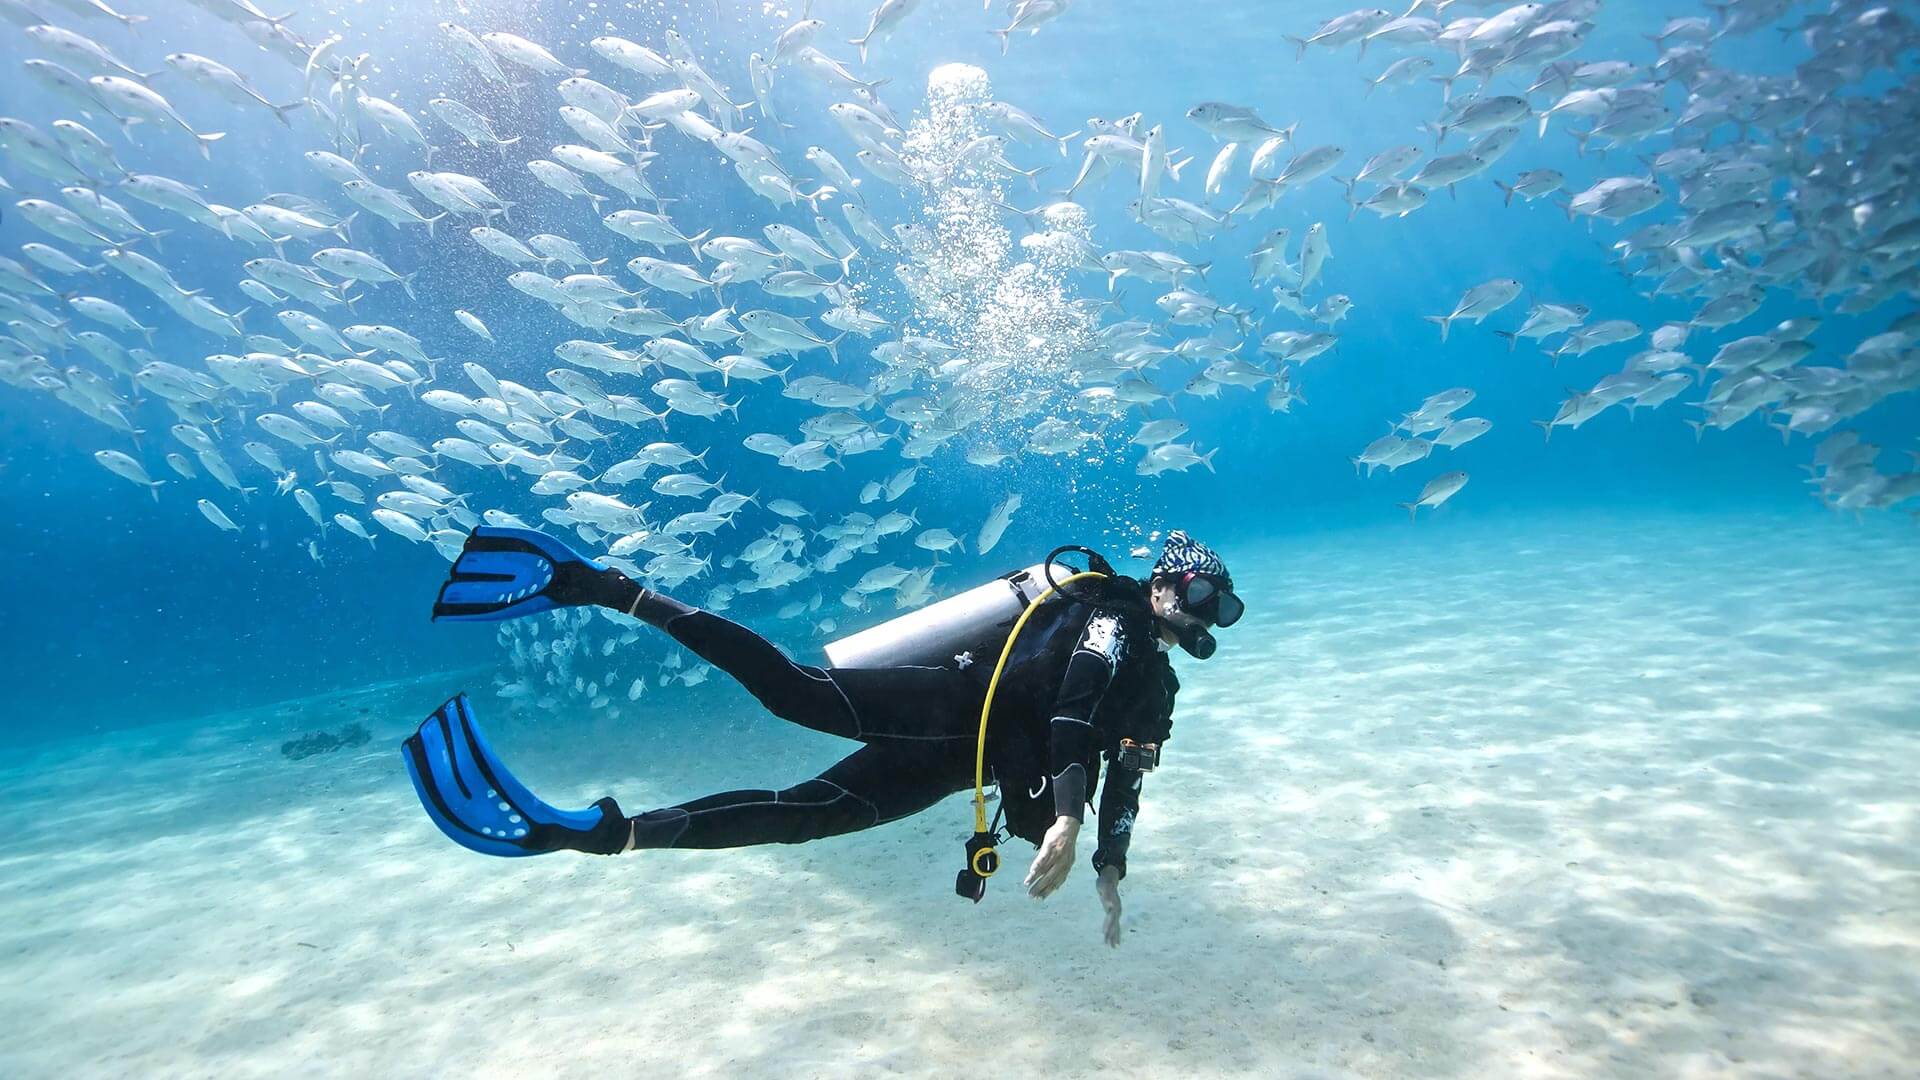 10 top Scuba Diving Spots in South East Asia | PickYourTrail